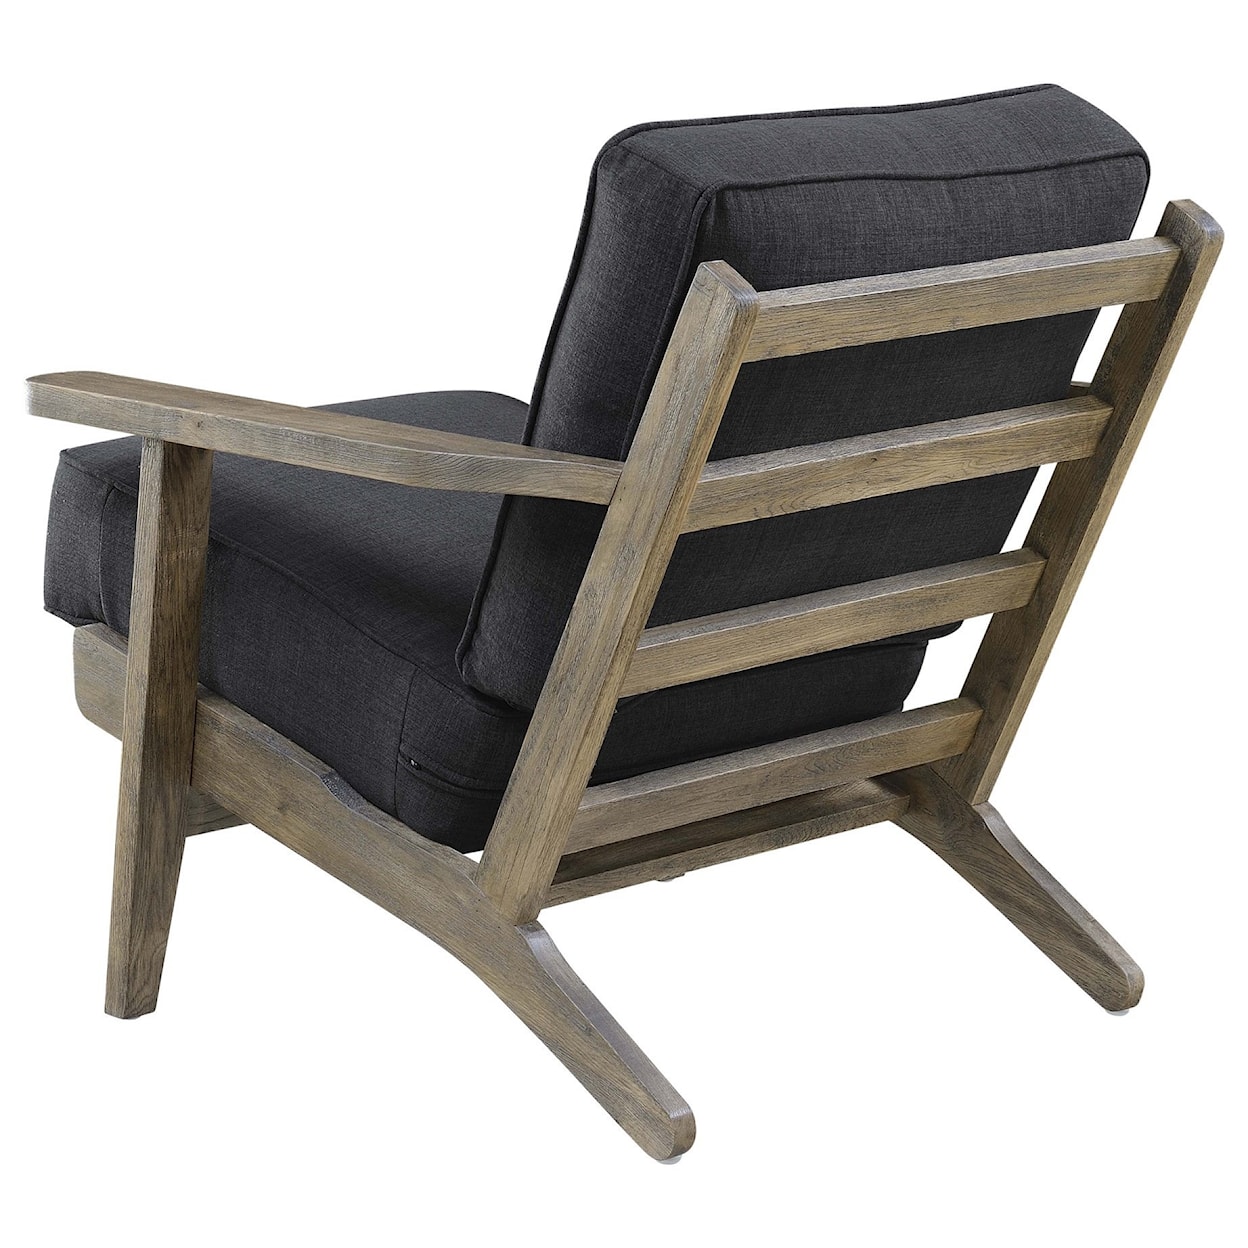 Elements Metro Accent Chair